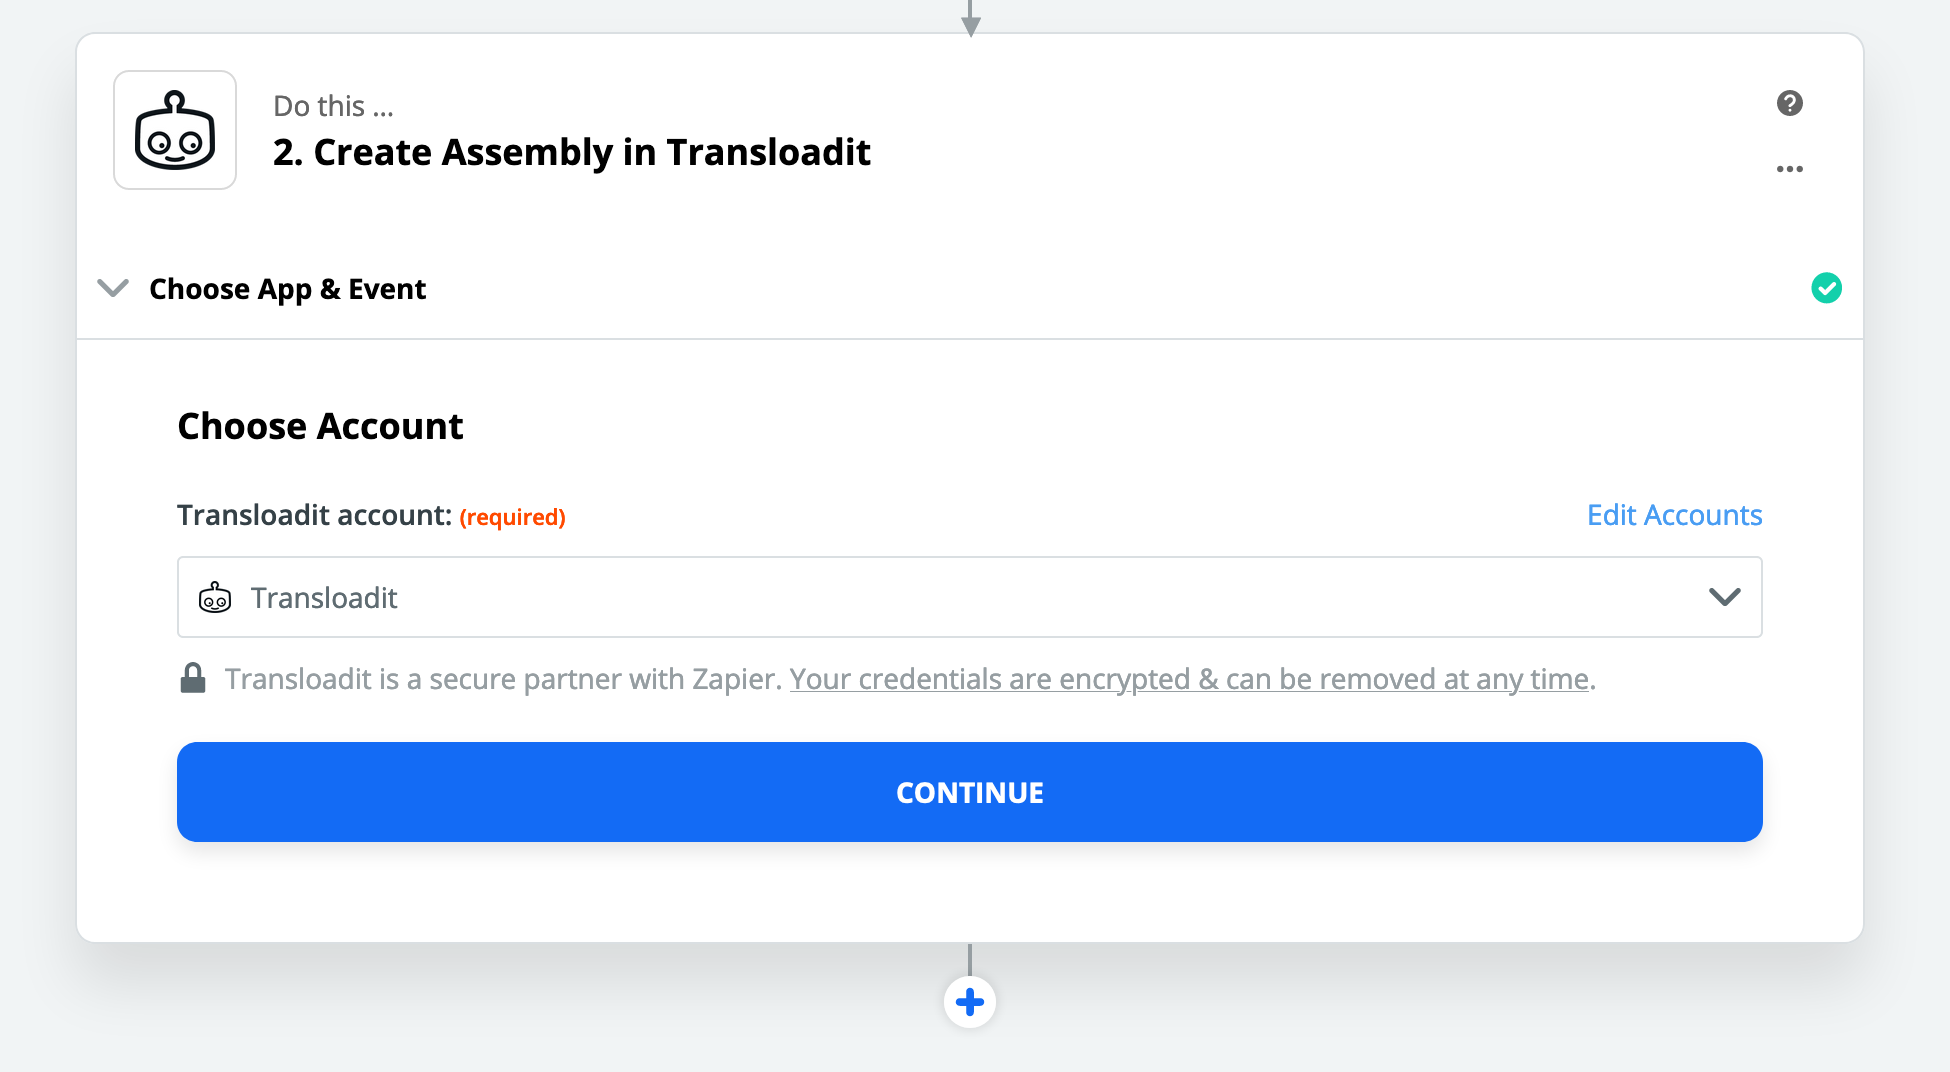 The action is now connected to Transloadit